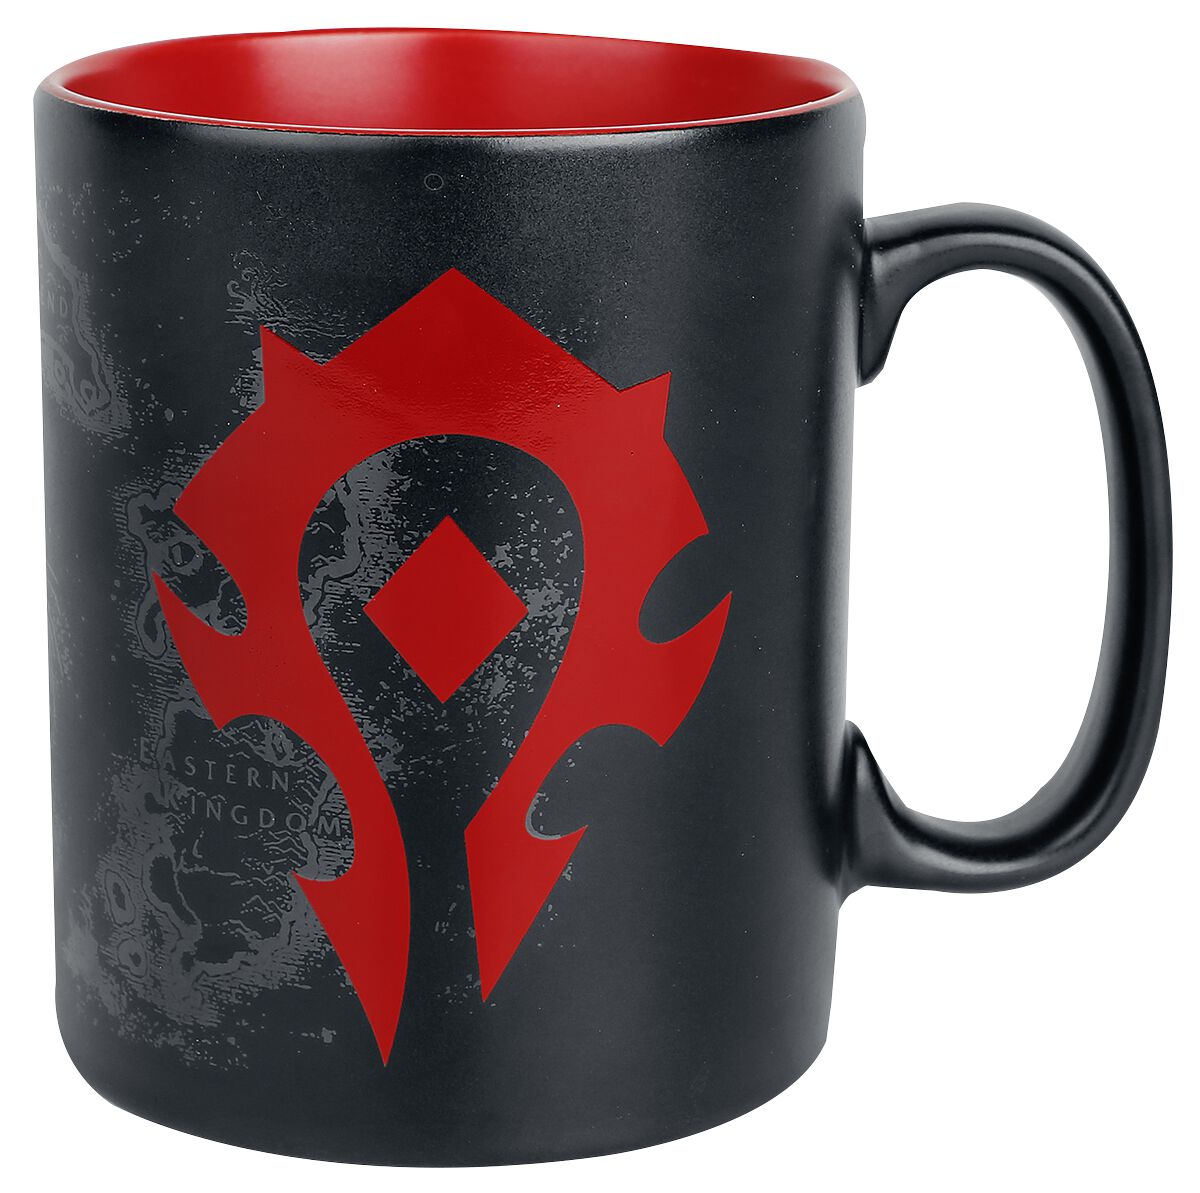 Image of Tazza Gaming di World Of Warcraft - Horde - Unisex - nero/rosso